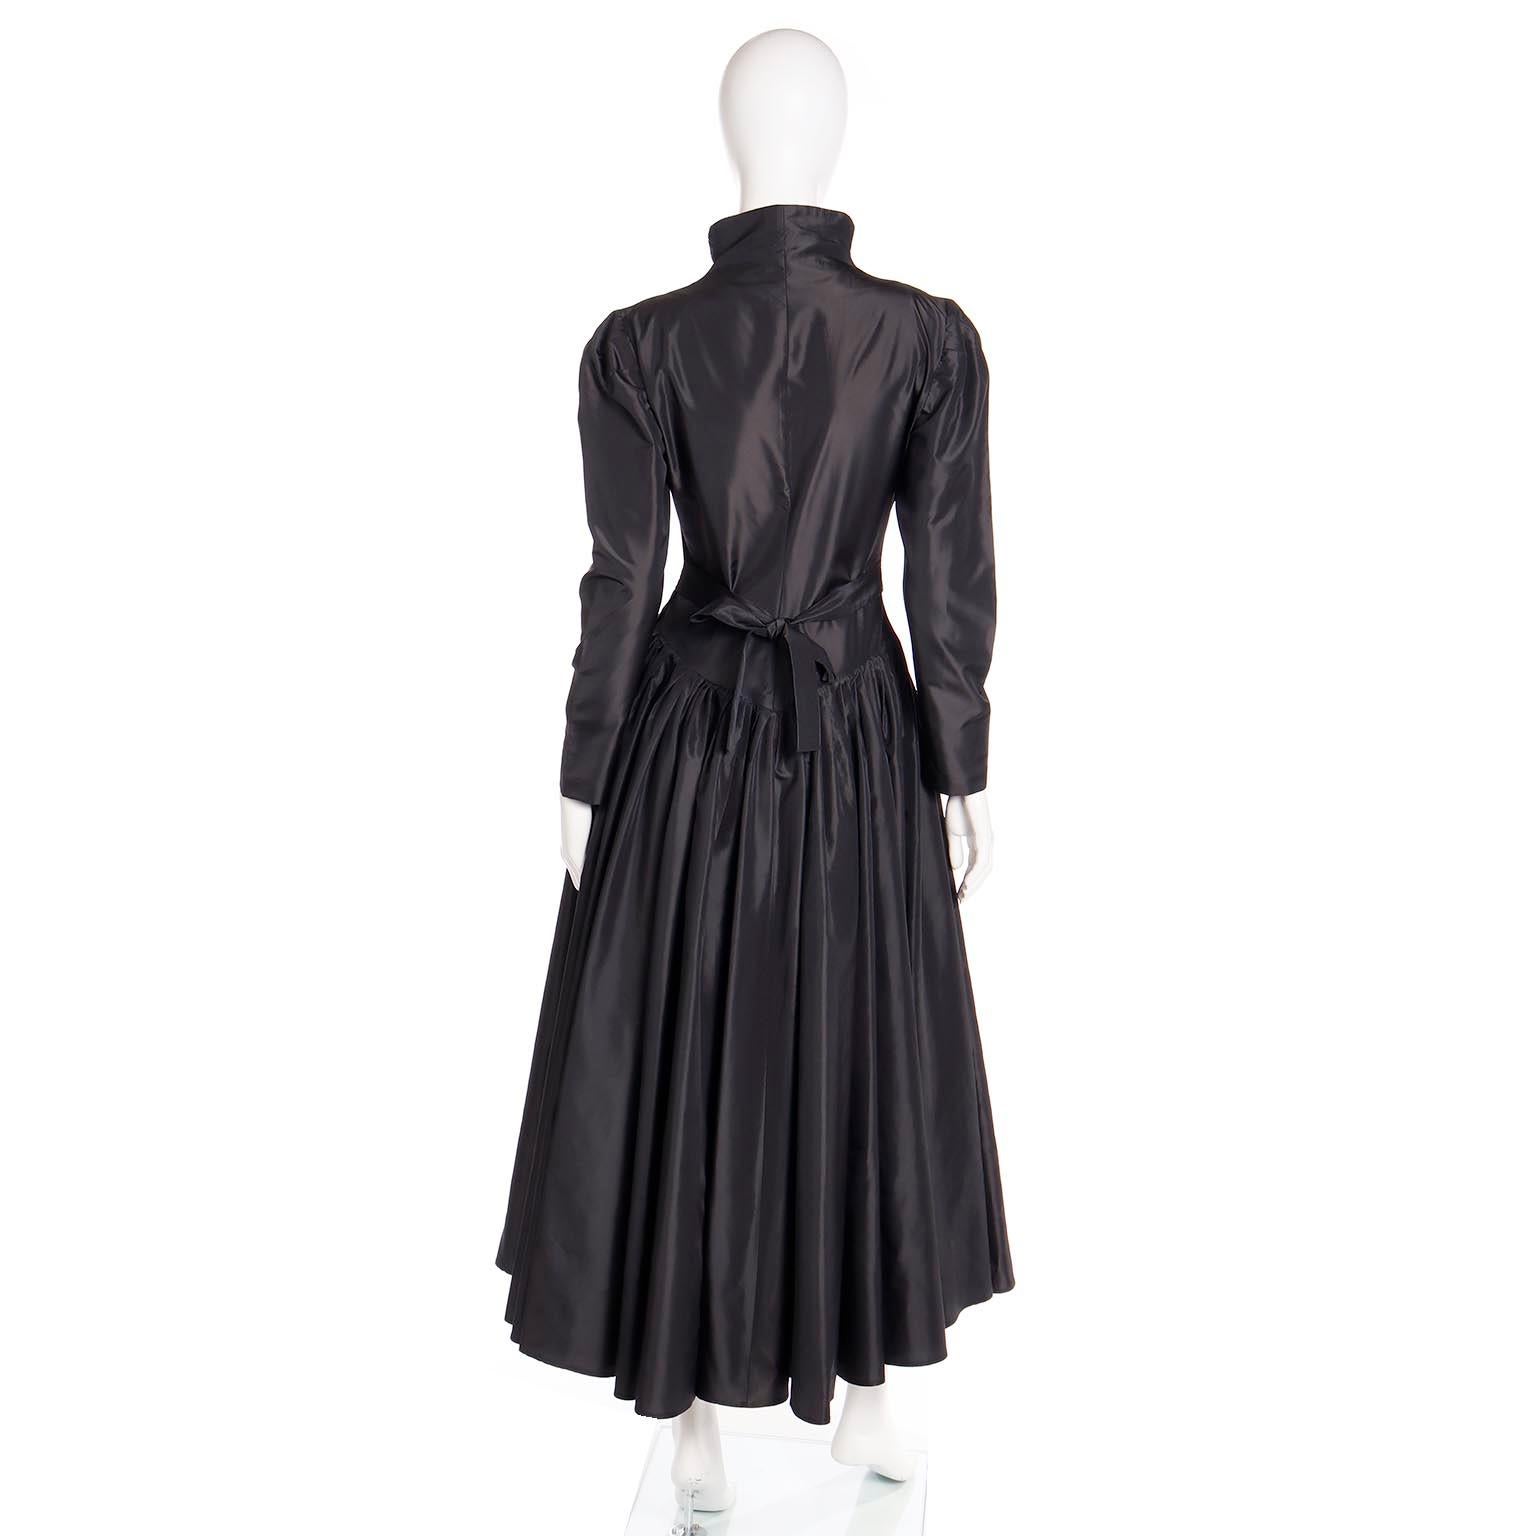 1980s Norma Kamali Victorian Inspired Black Dress For Sale 1